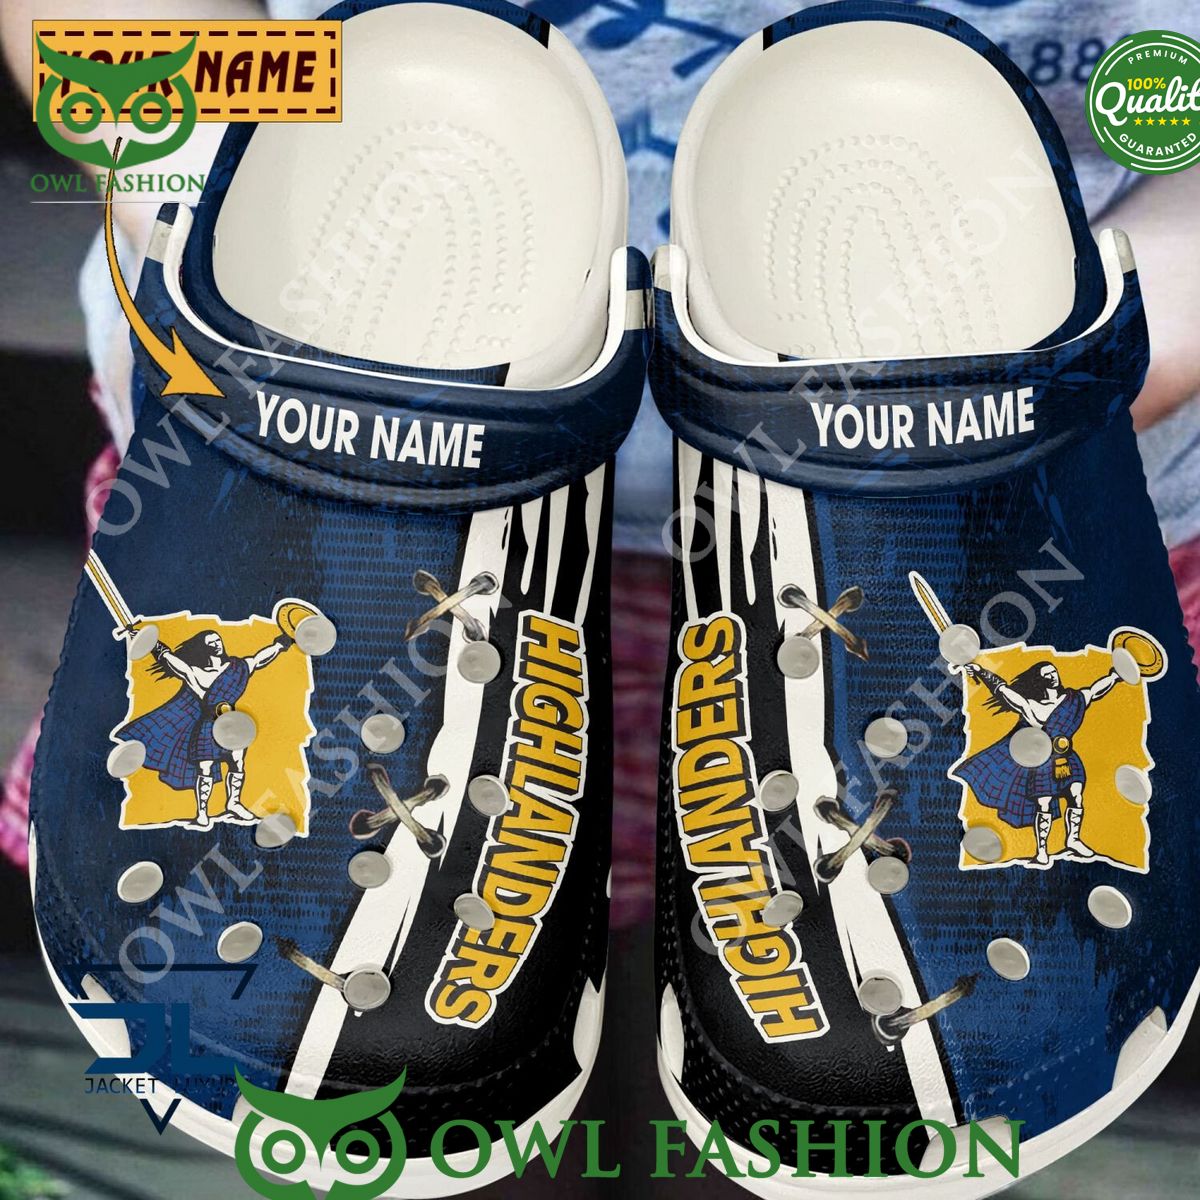 Highlanders Rugby Customized Crocs Such a scenic view ,looks great.